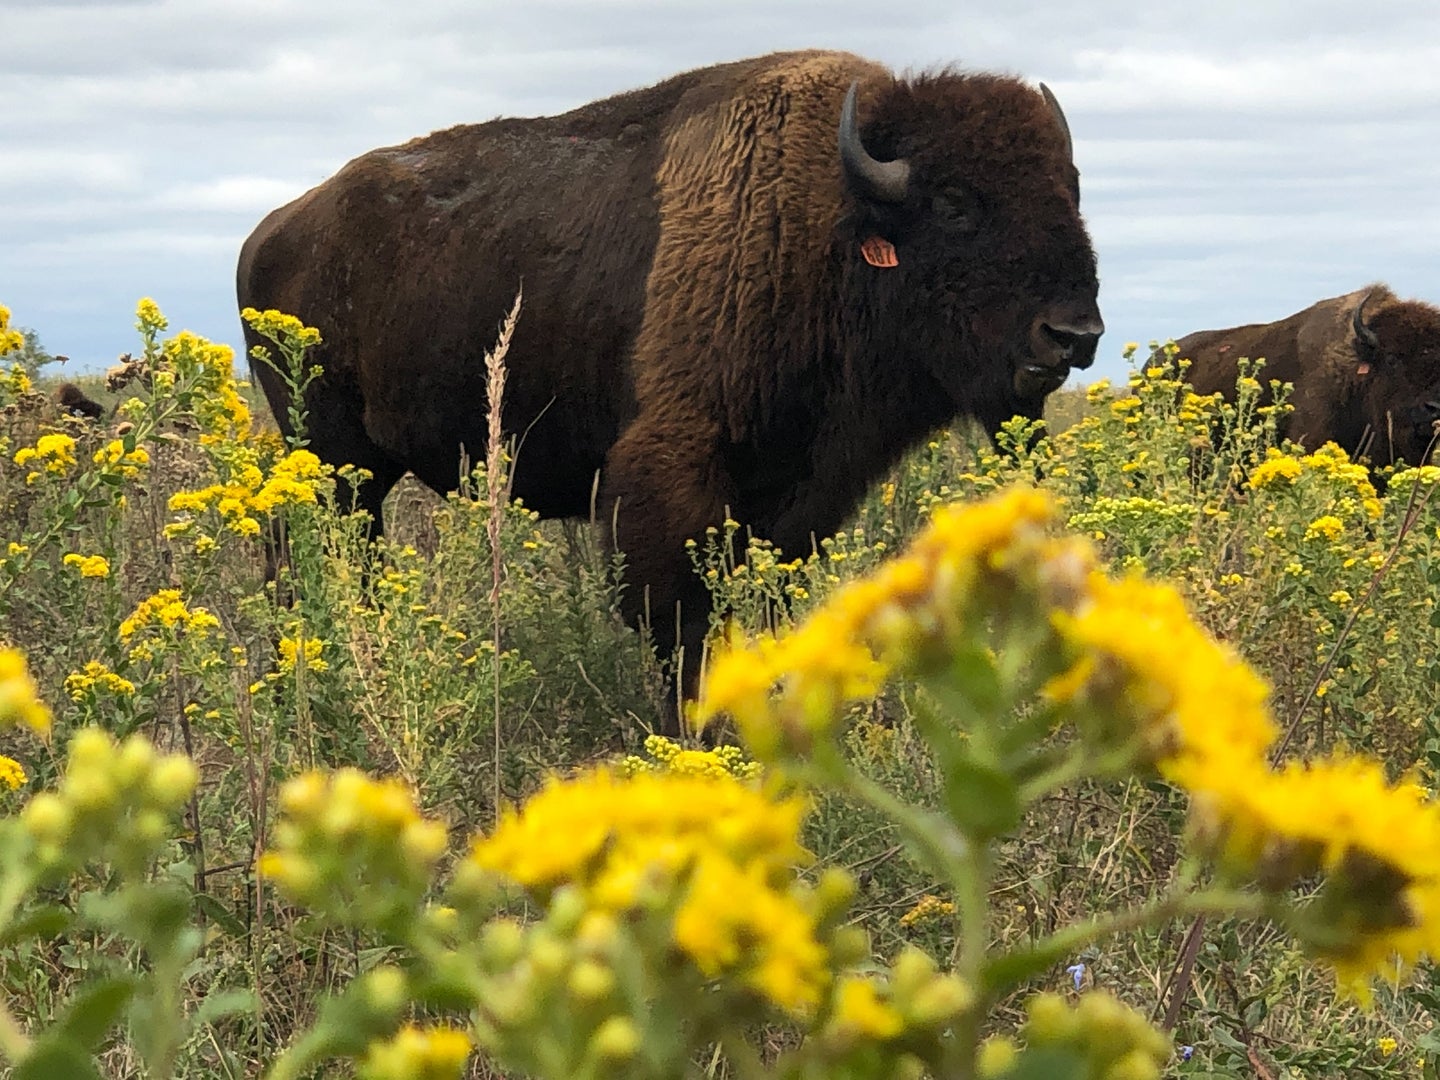 Full-grown bison standing in a prairie full of yellow goldenrod wildflowers